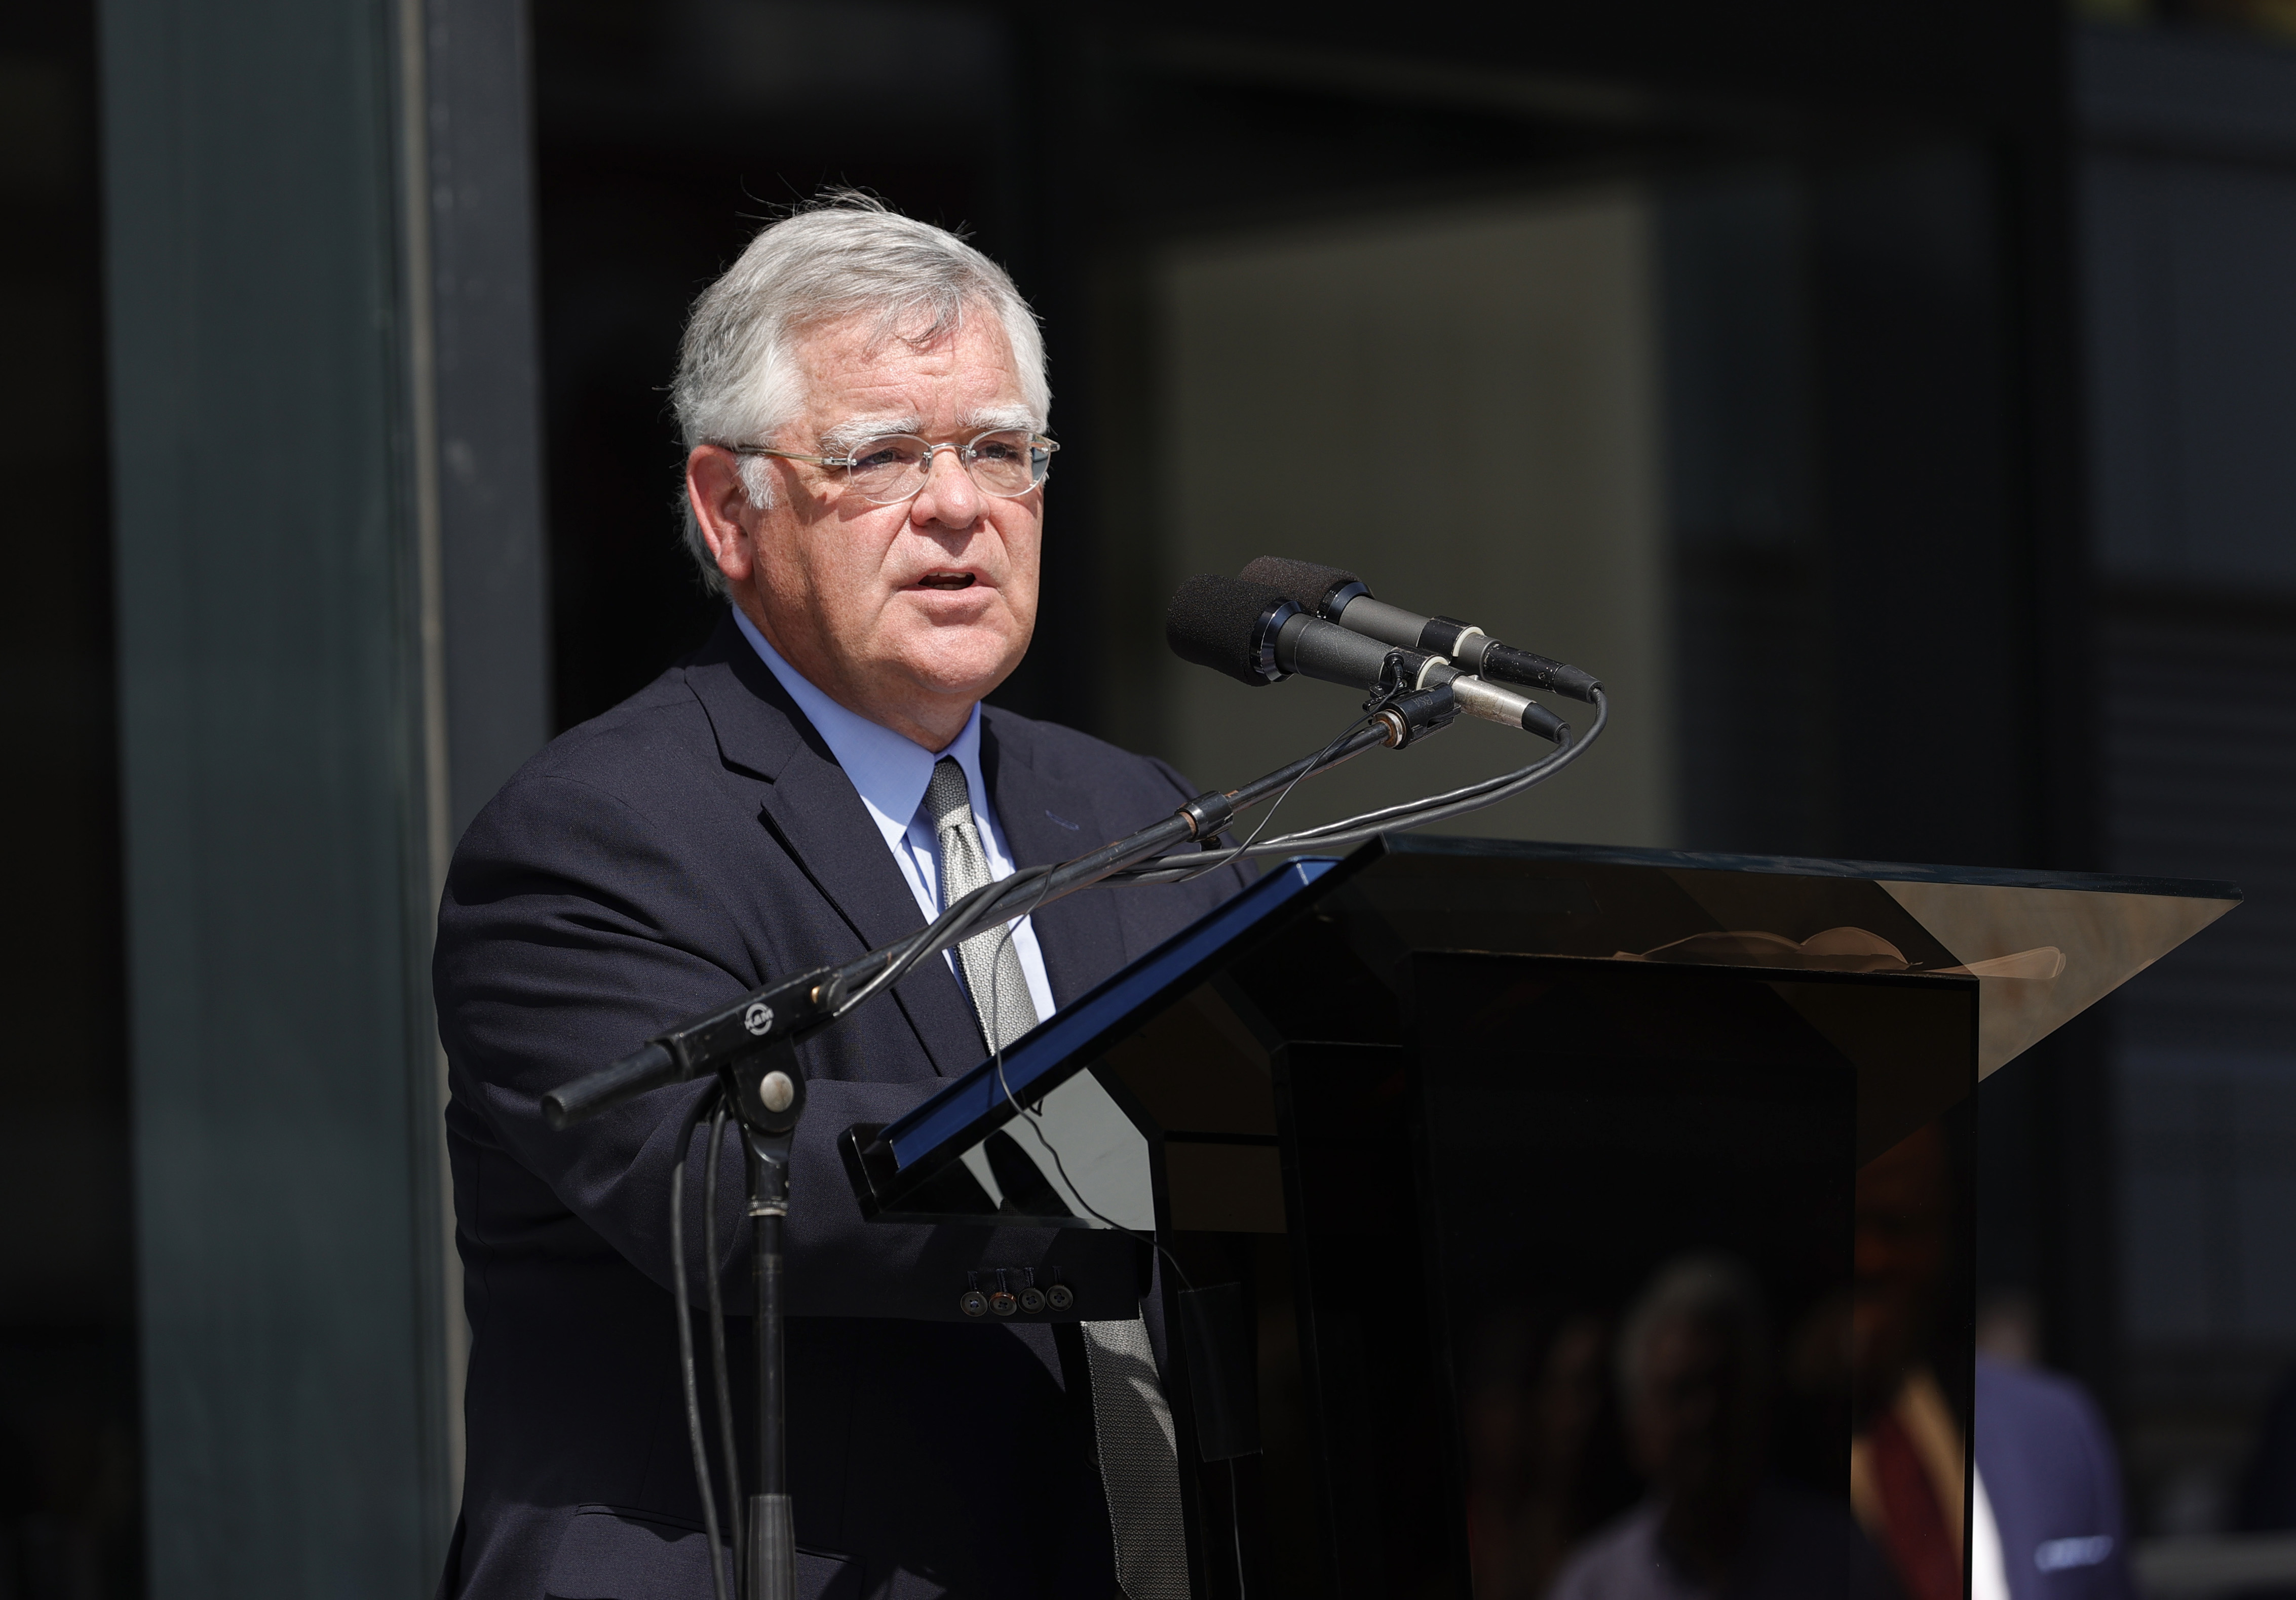 Nashville Mayor John Cooper attends the National Museum of African American Music Dedication on June 19, 2021 in Nashville, Tennessee.